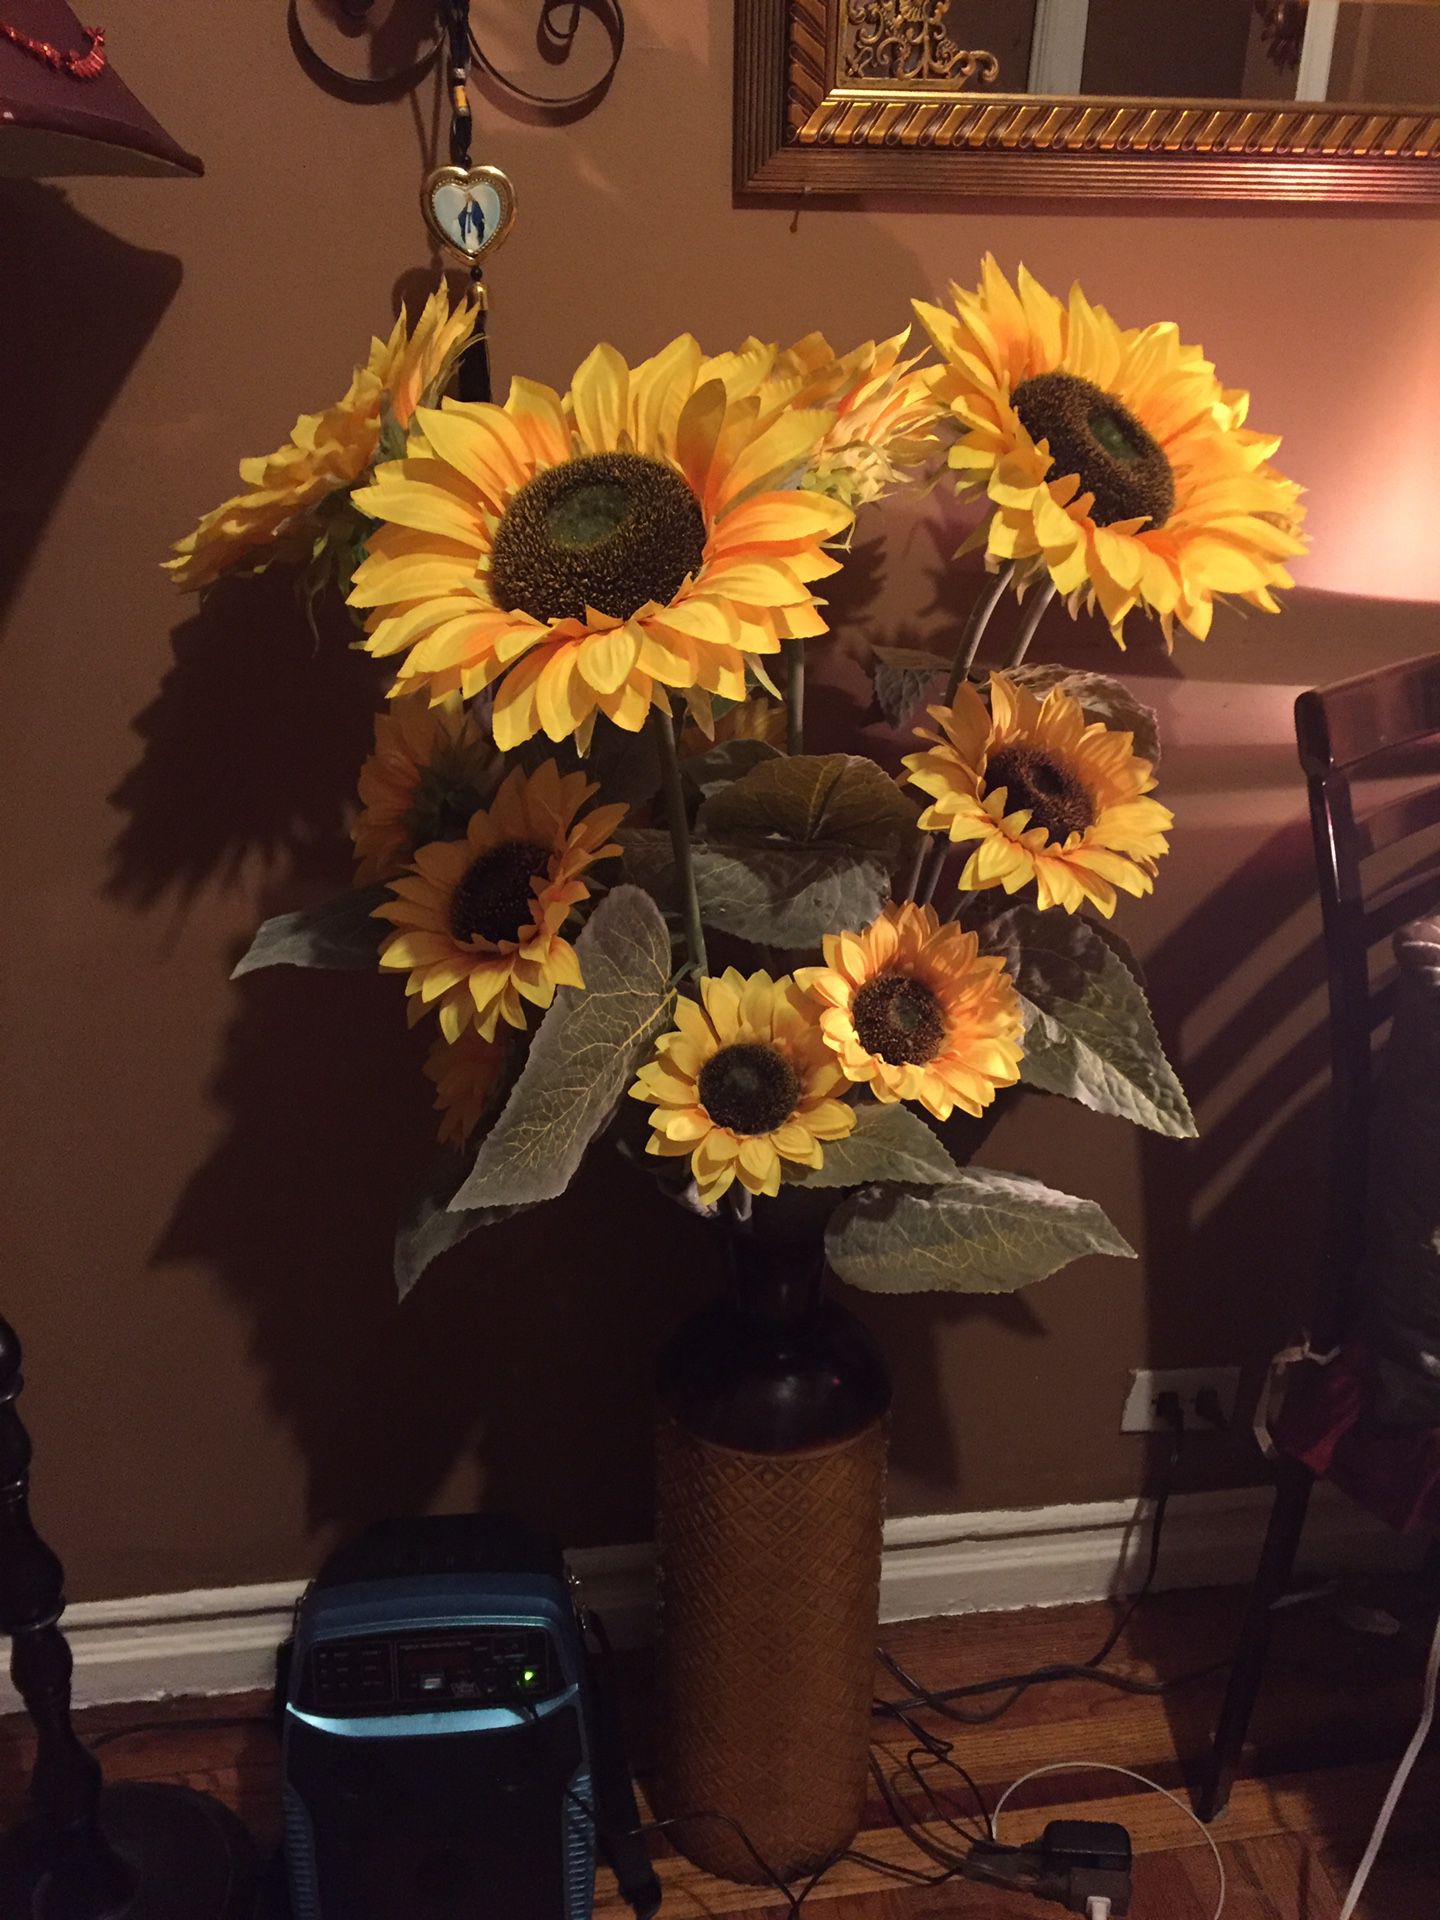 Sun flowers with vase